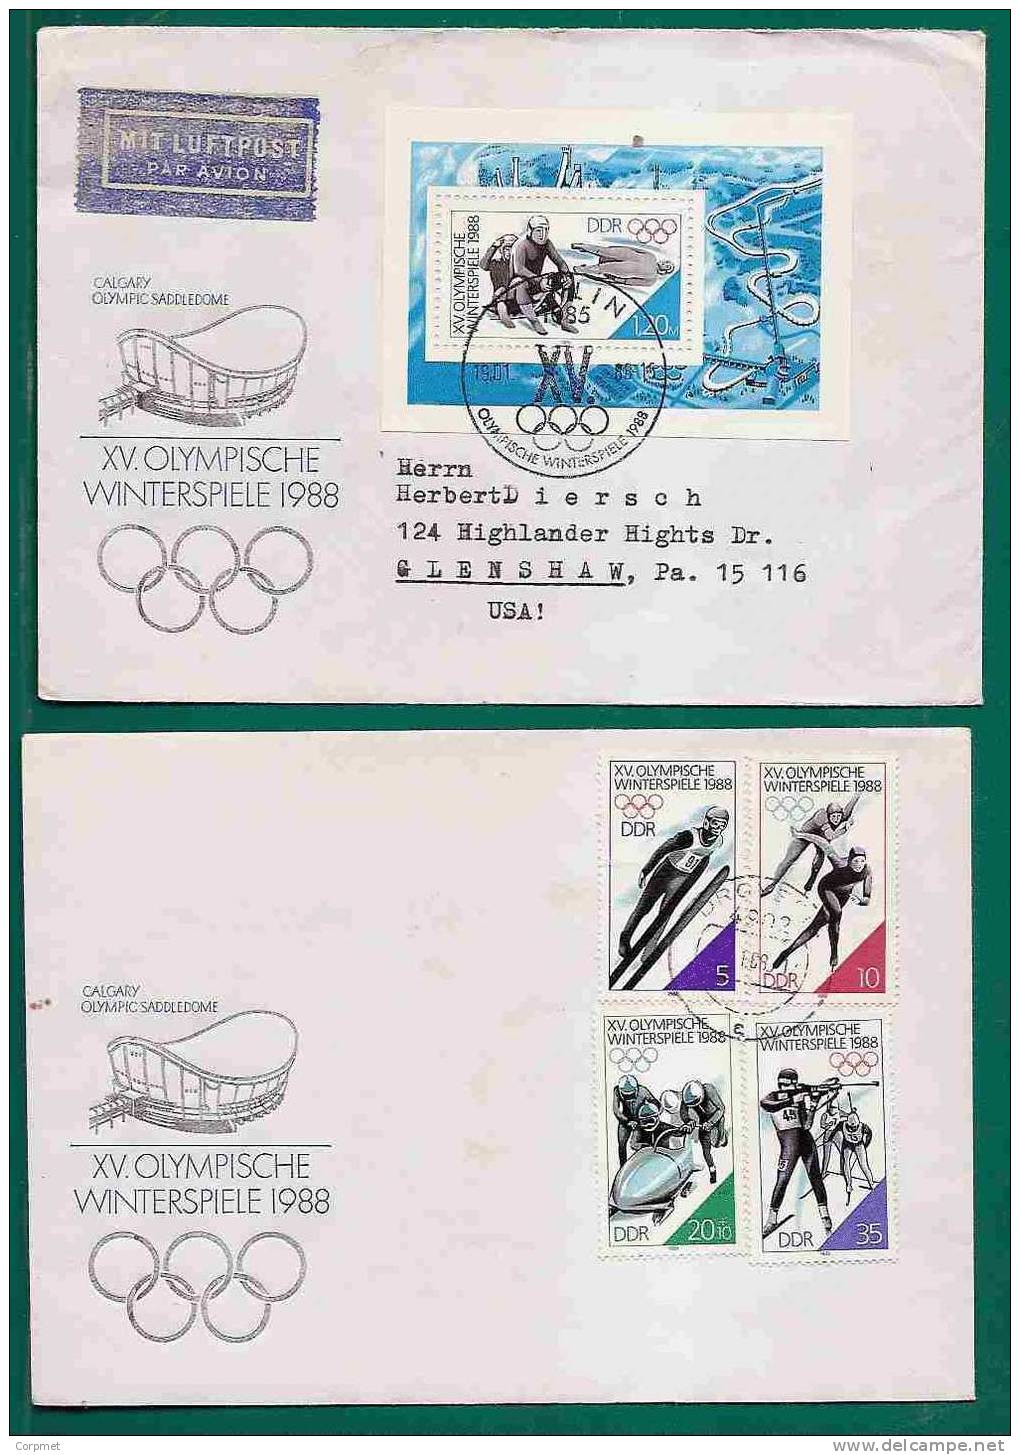 OLYMPIC GAMES - 1988 CALGARY - GERMANY DDR - VF 2 FIRST DAY COVERS - Yvert # 2754/7 And SOUVENIR SHEET # Bl 89 - Inverno1988: Calgary